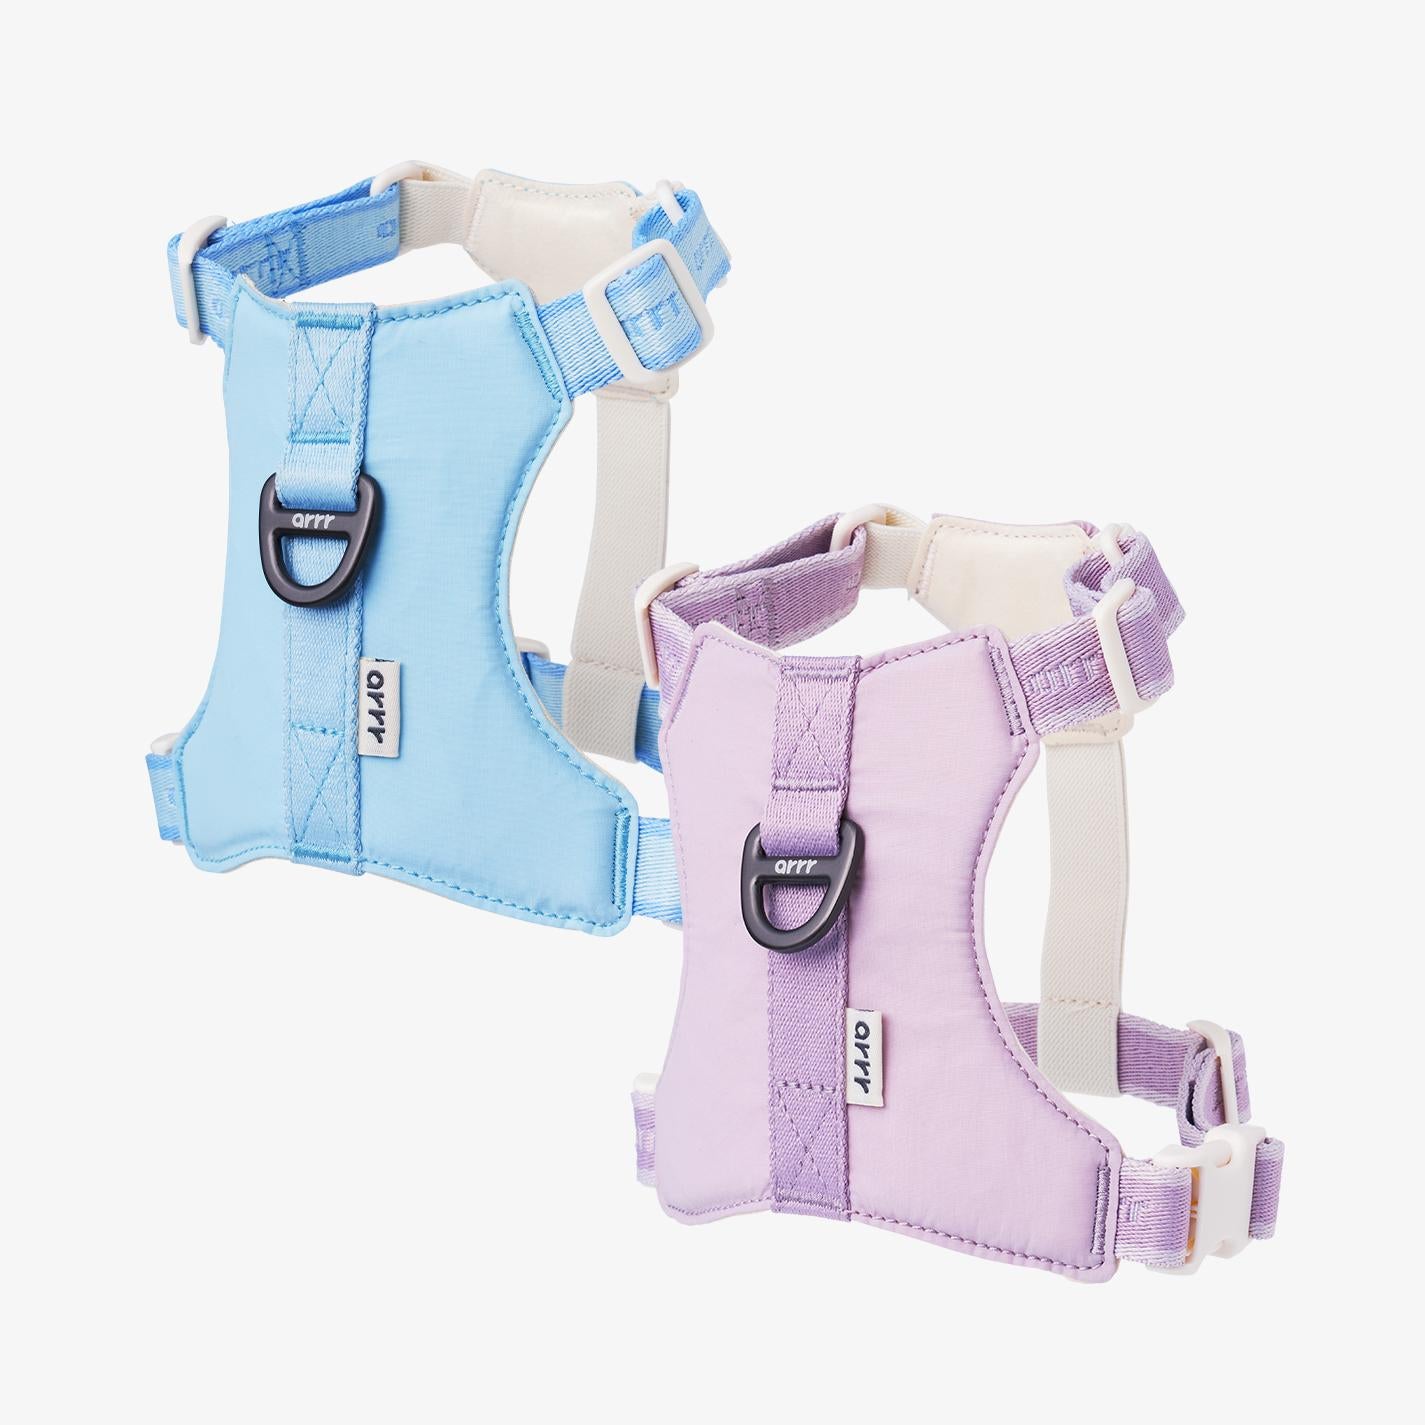 Arrr bouncing dog harness in 2 colours, cotton sky blue and lily lavender. Best dog harness design with stretch band and adjustable straps. 